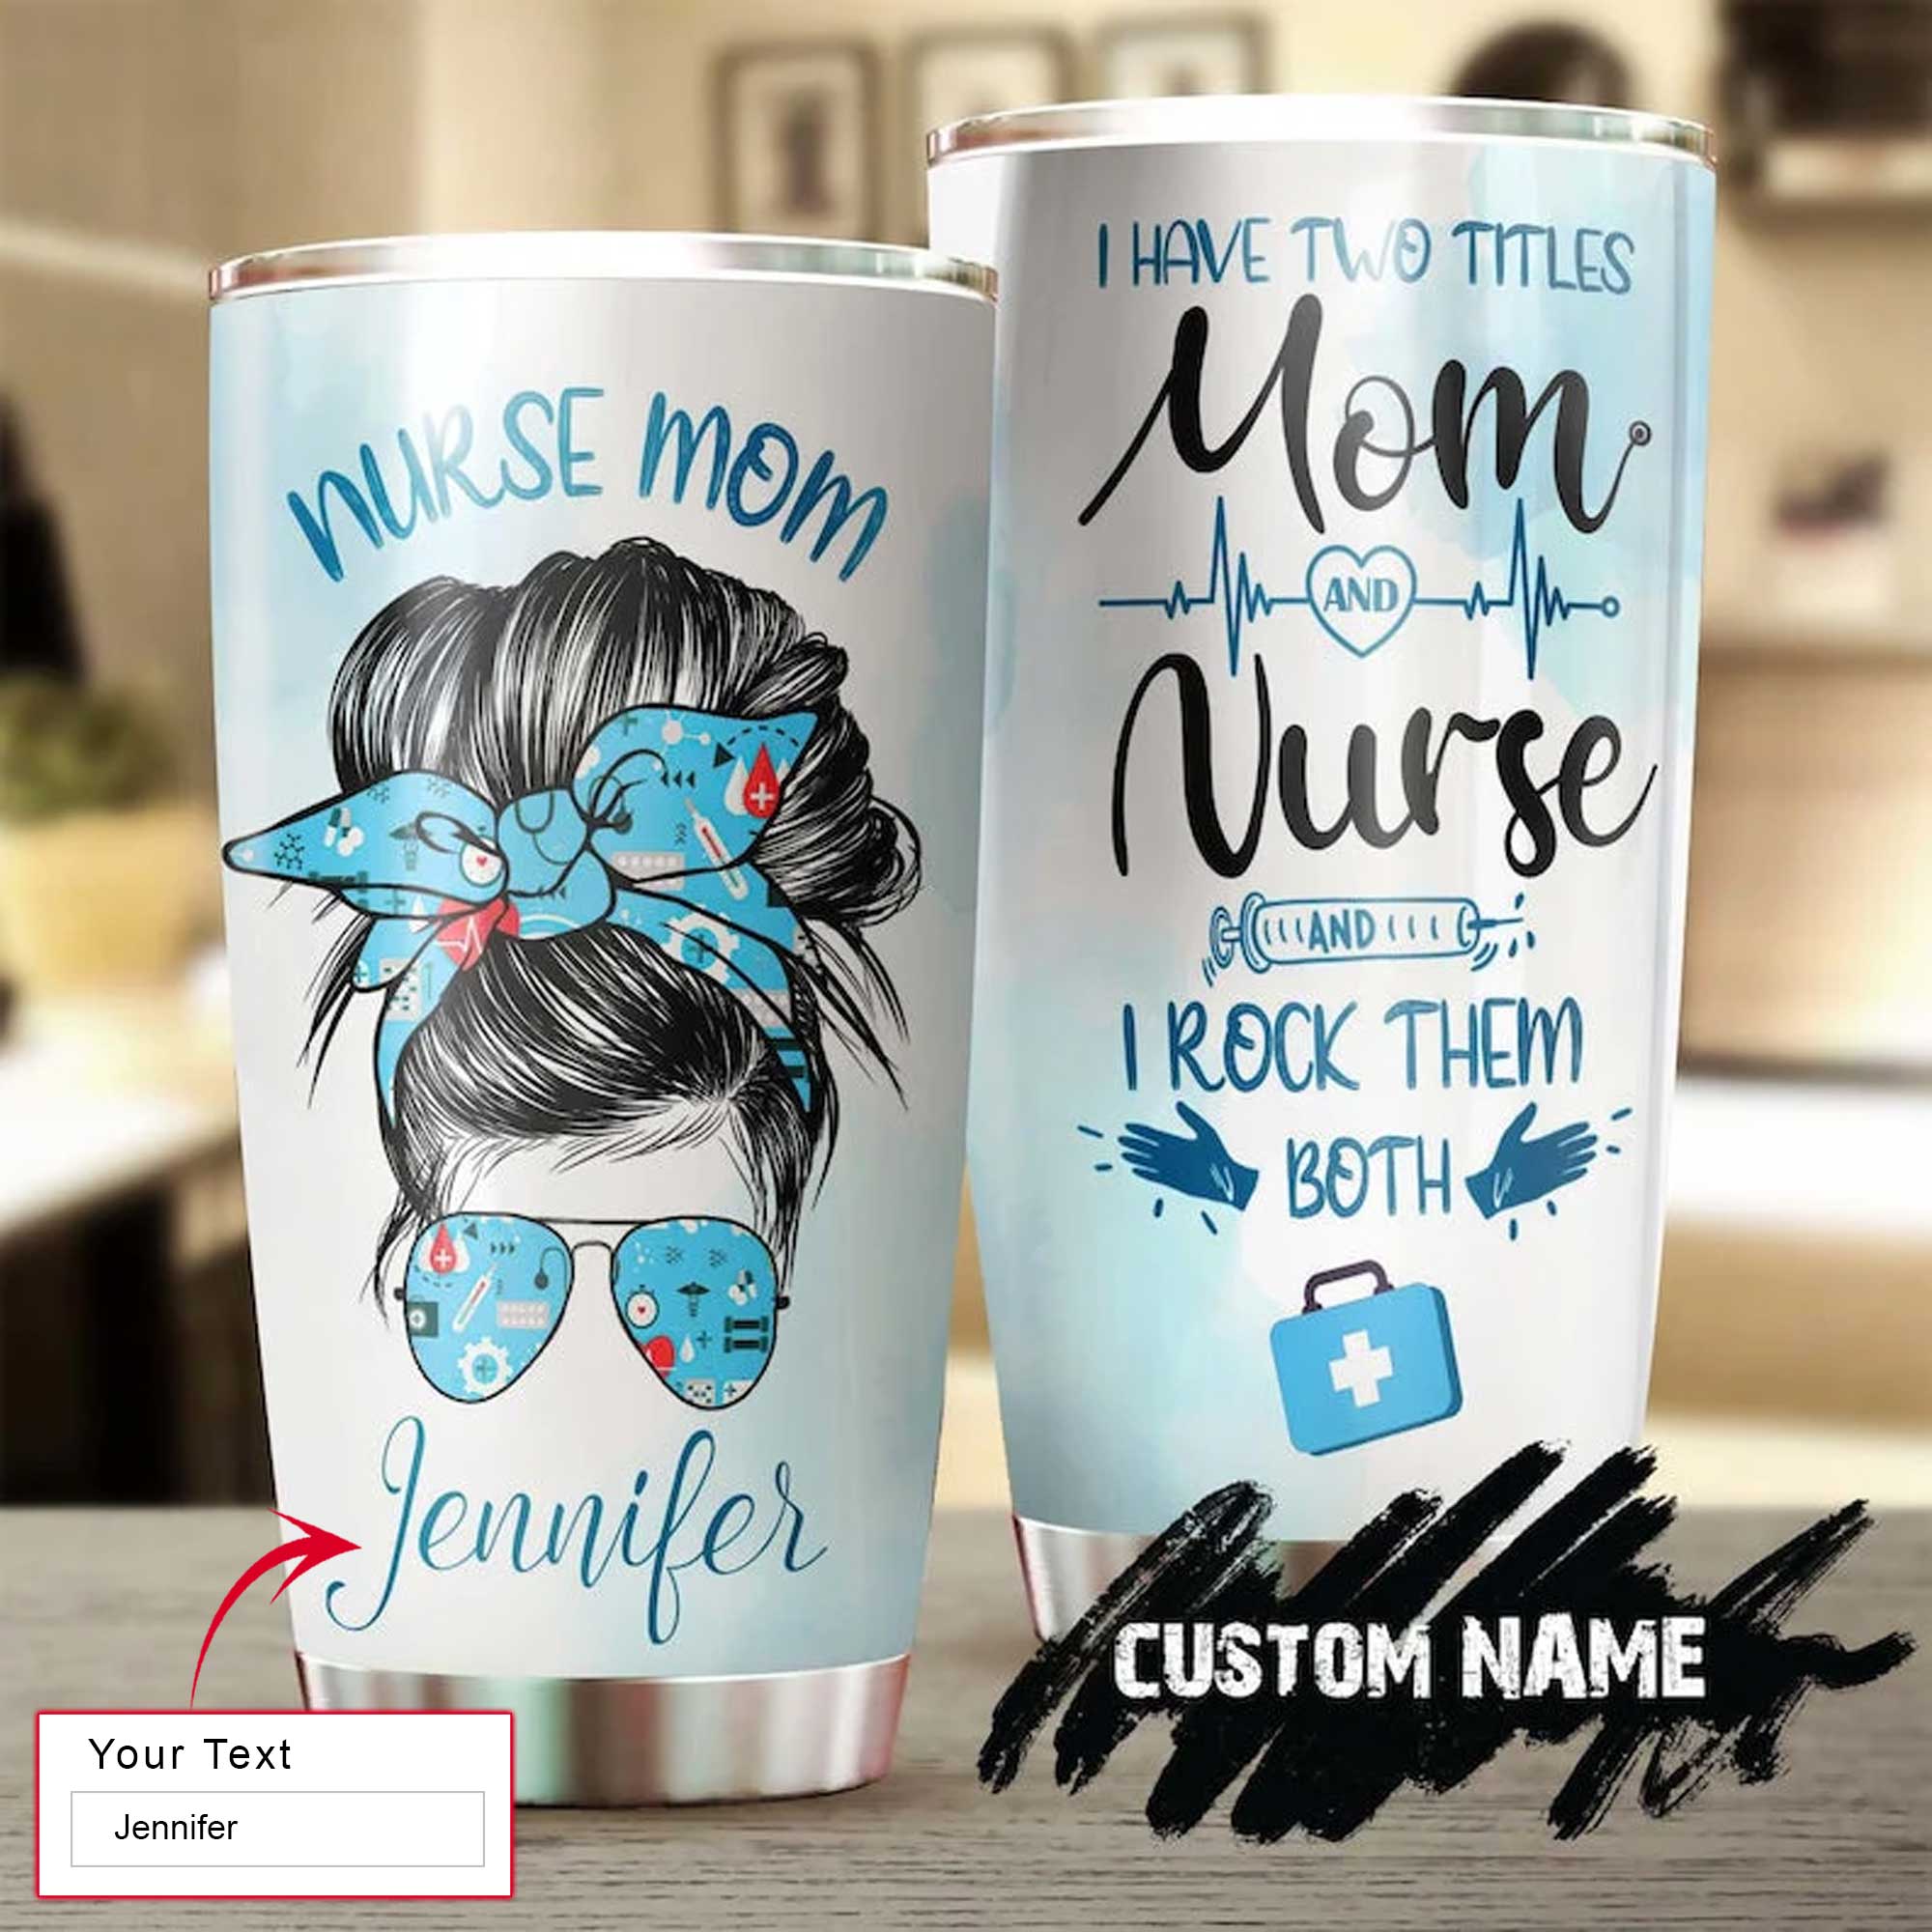 Nurse Personalized Mother's Day Gift Tumbler - Custom Gift For Mother's Day, Presents For Mom - Nurse Mom Titles I Rock Them Both Tumbler